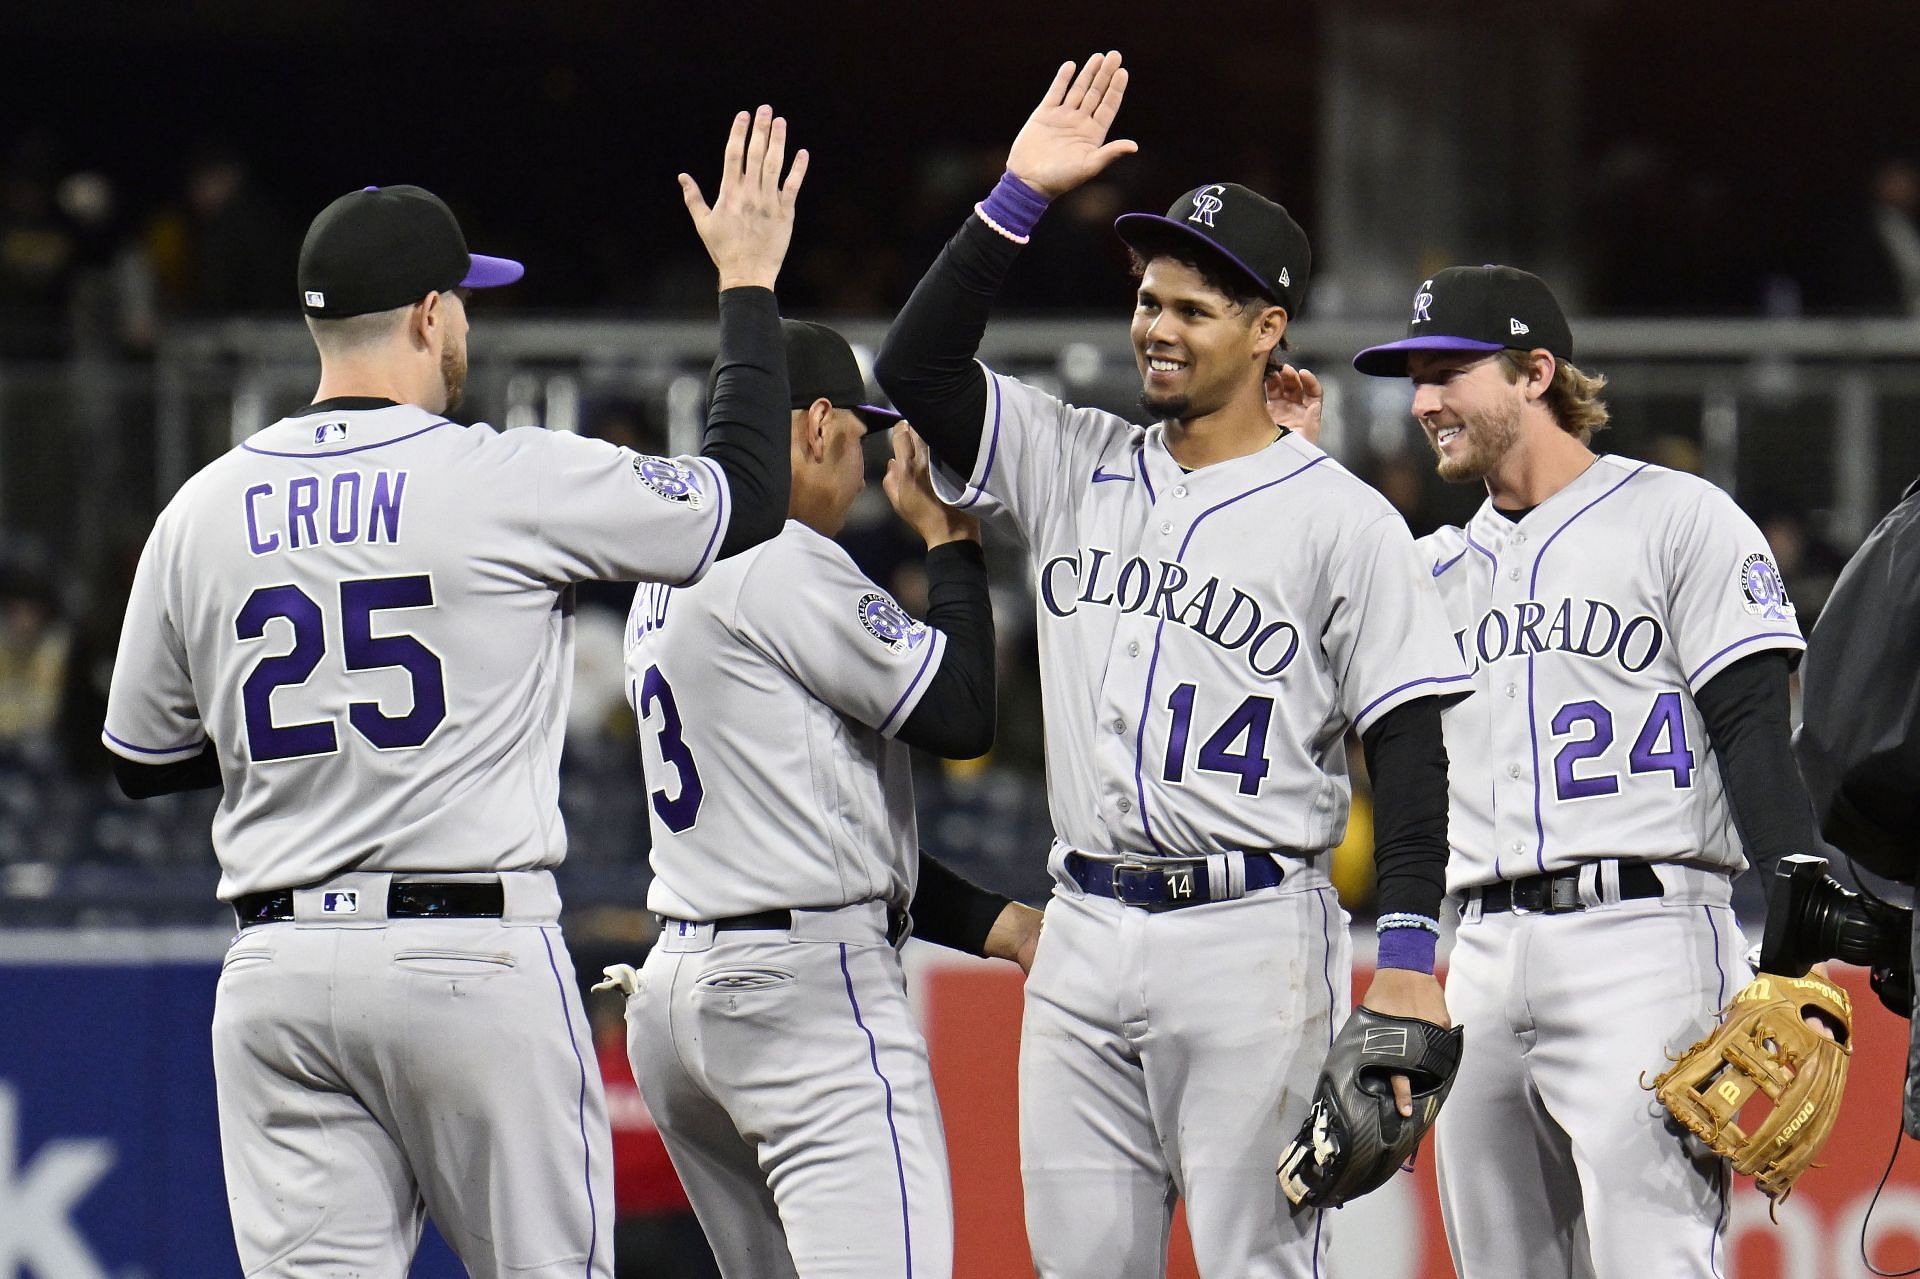 Cron, Rockies rain homers on Padres for 7-2 opening win - The San